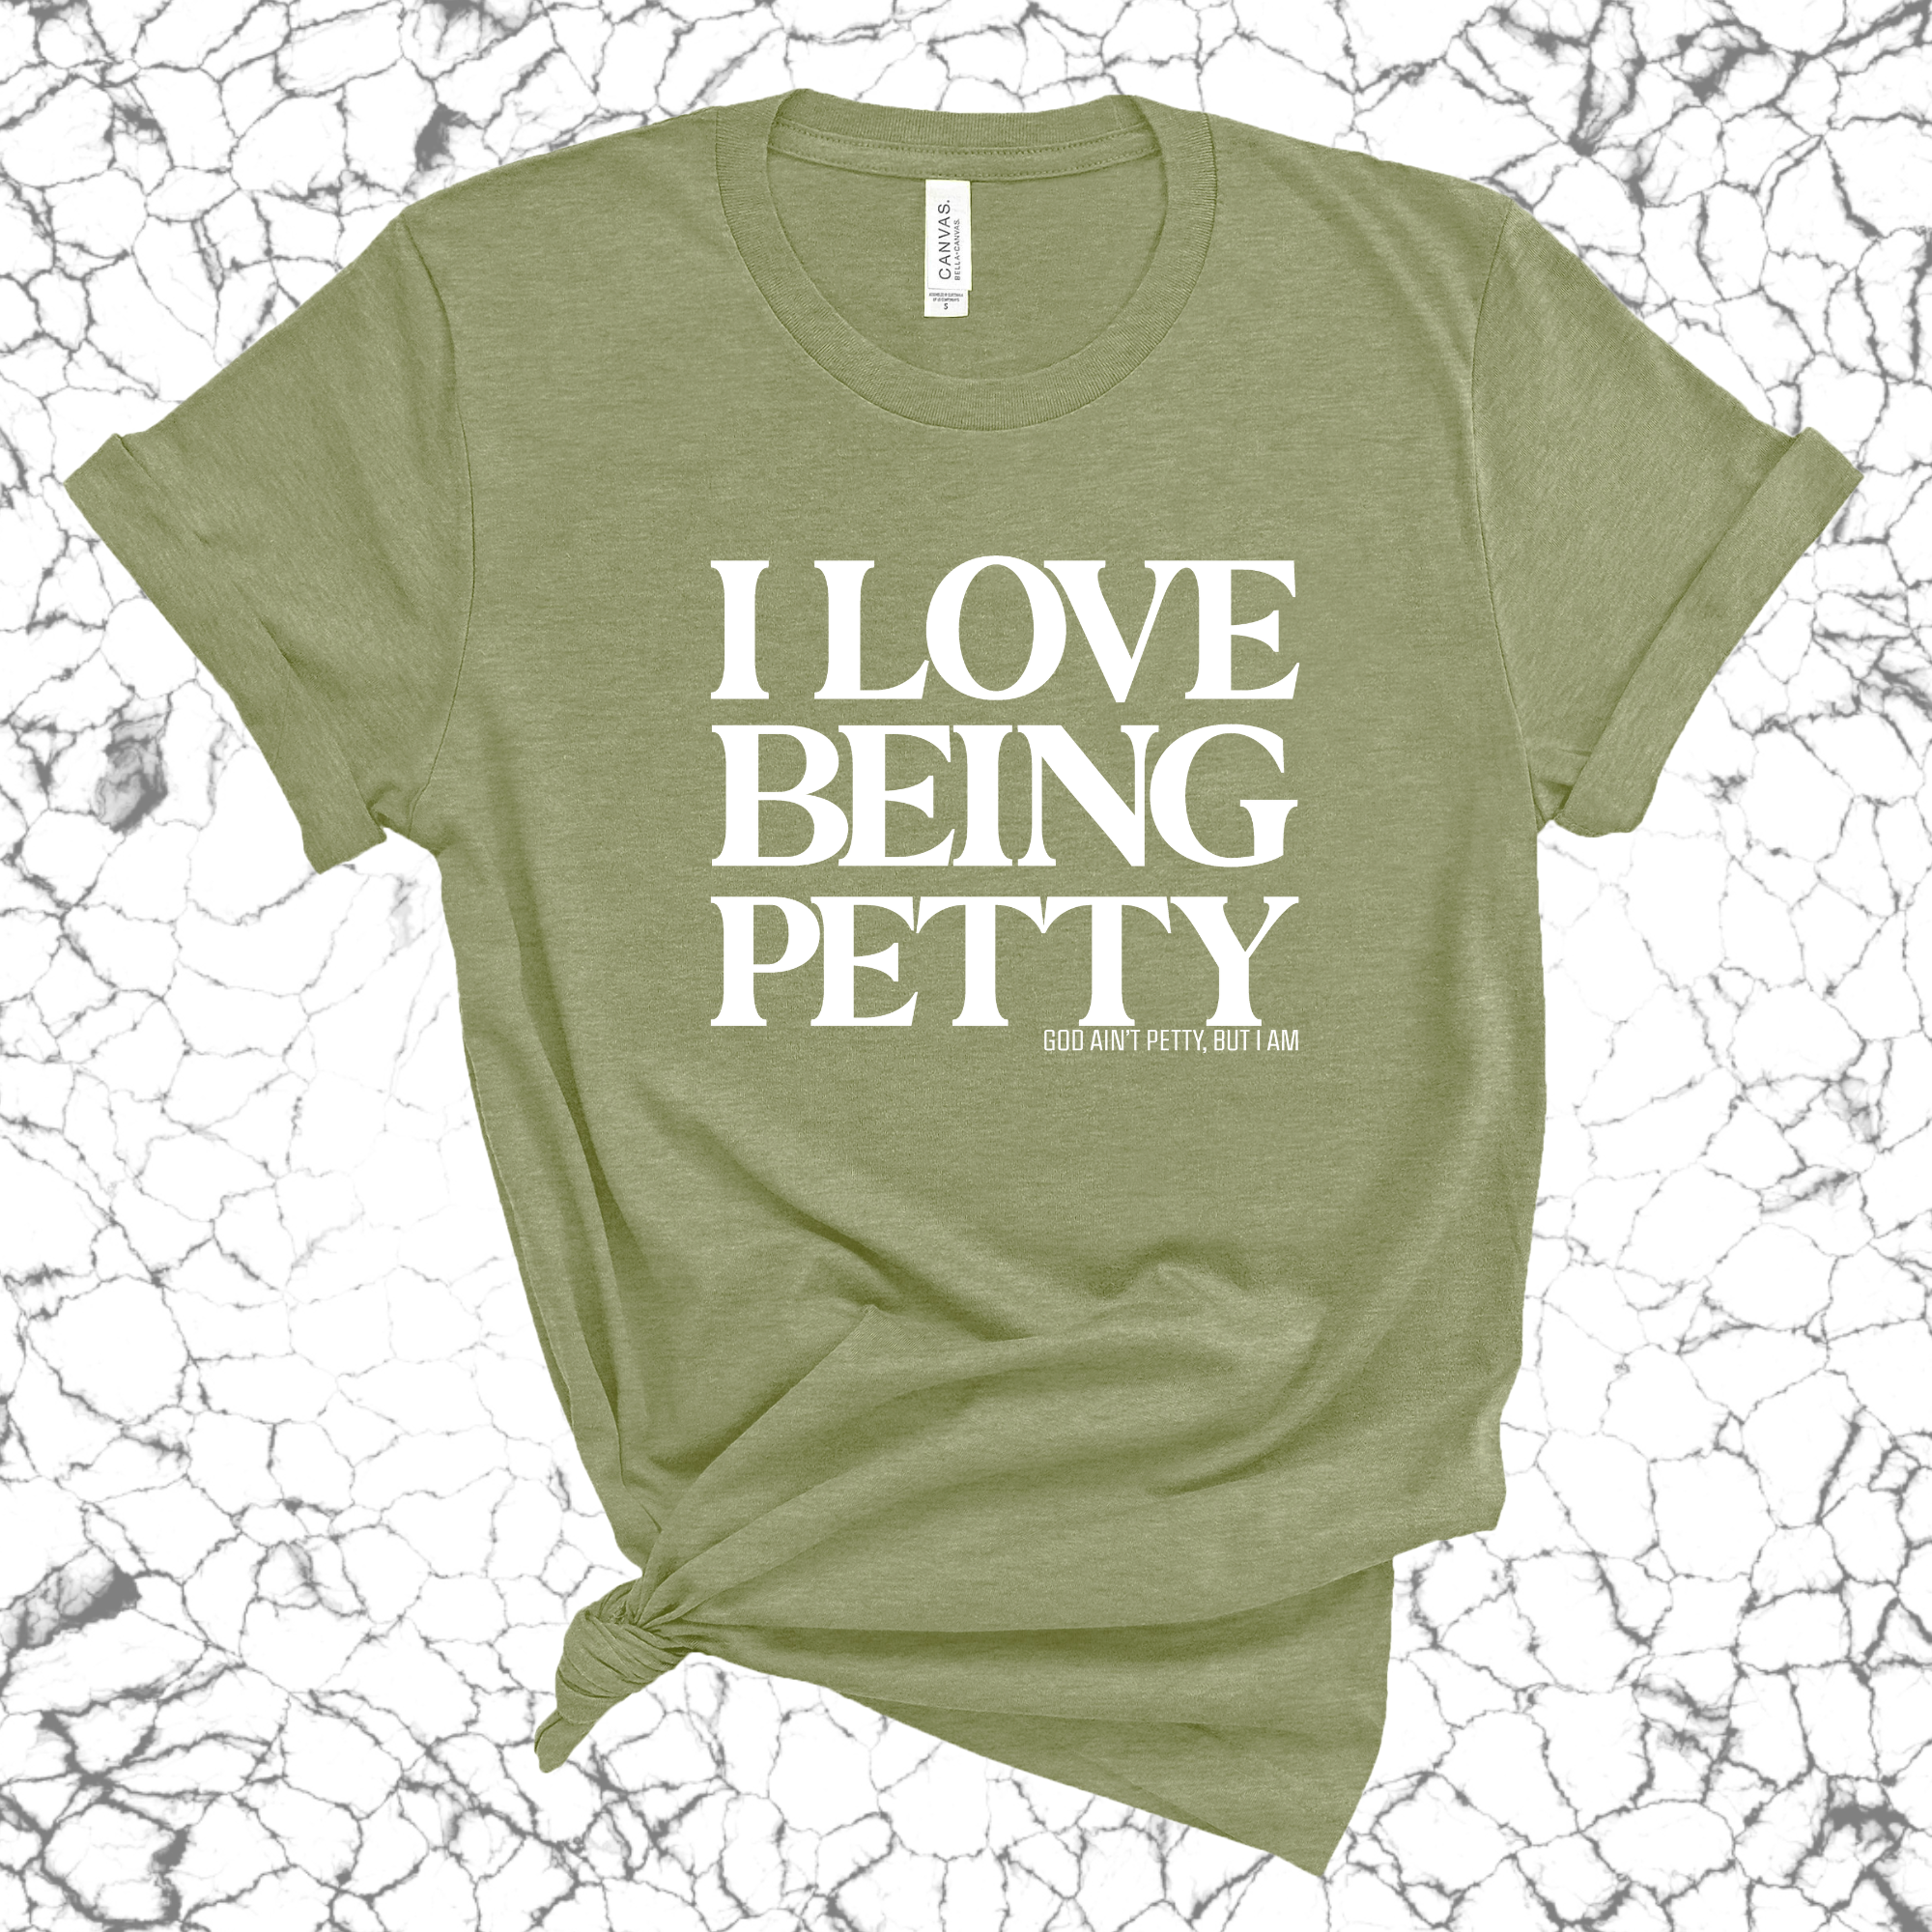 I Love Being Petty Unisex Tee-T-Shirt-The Original God Ain't Petty But I Am